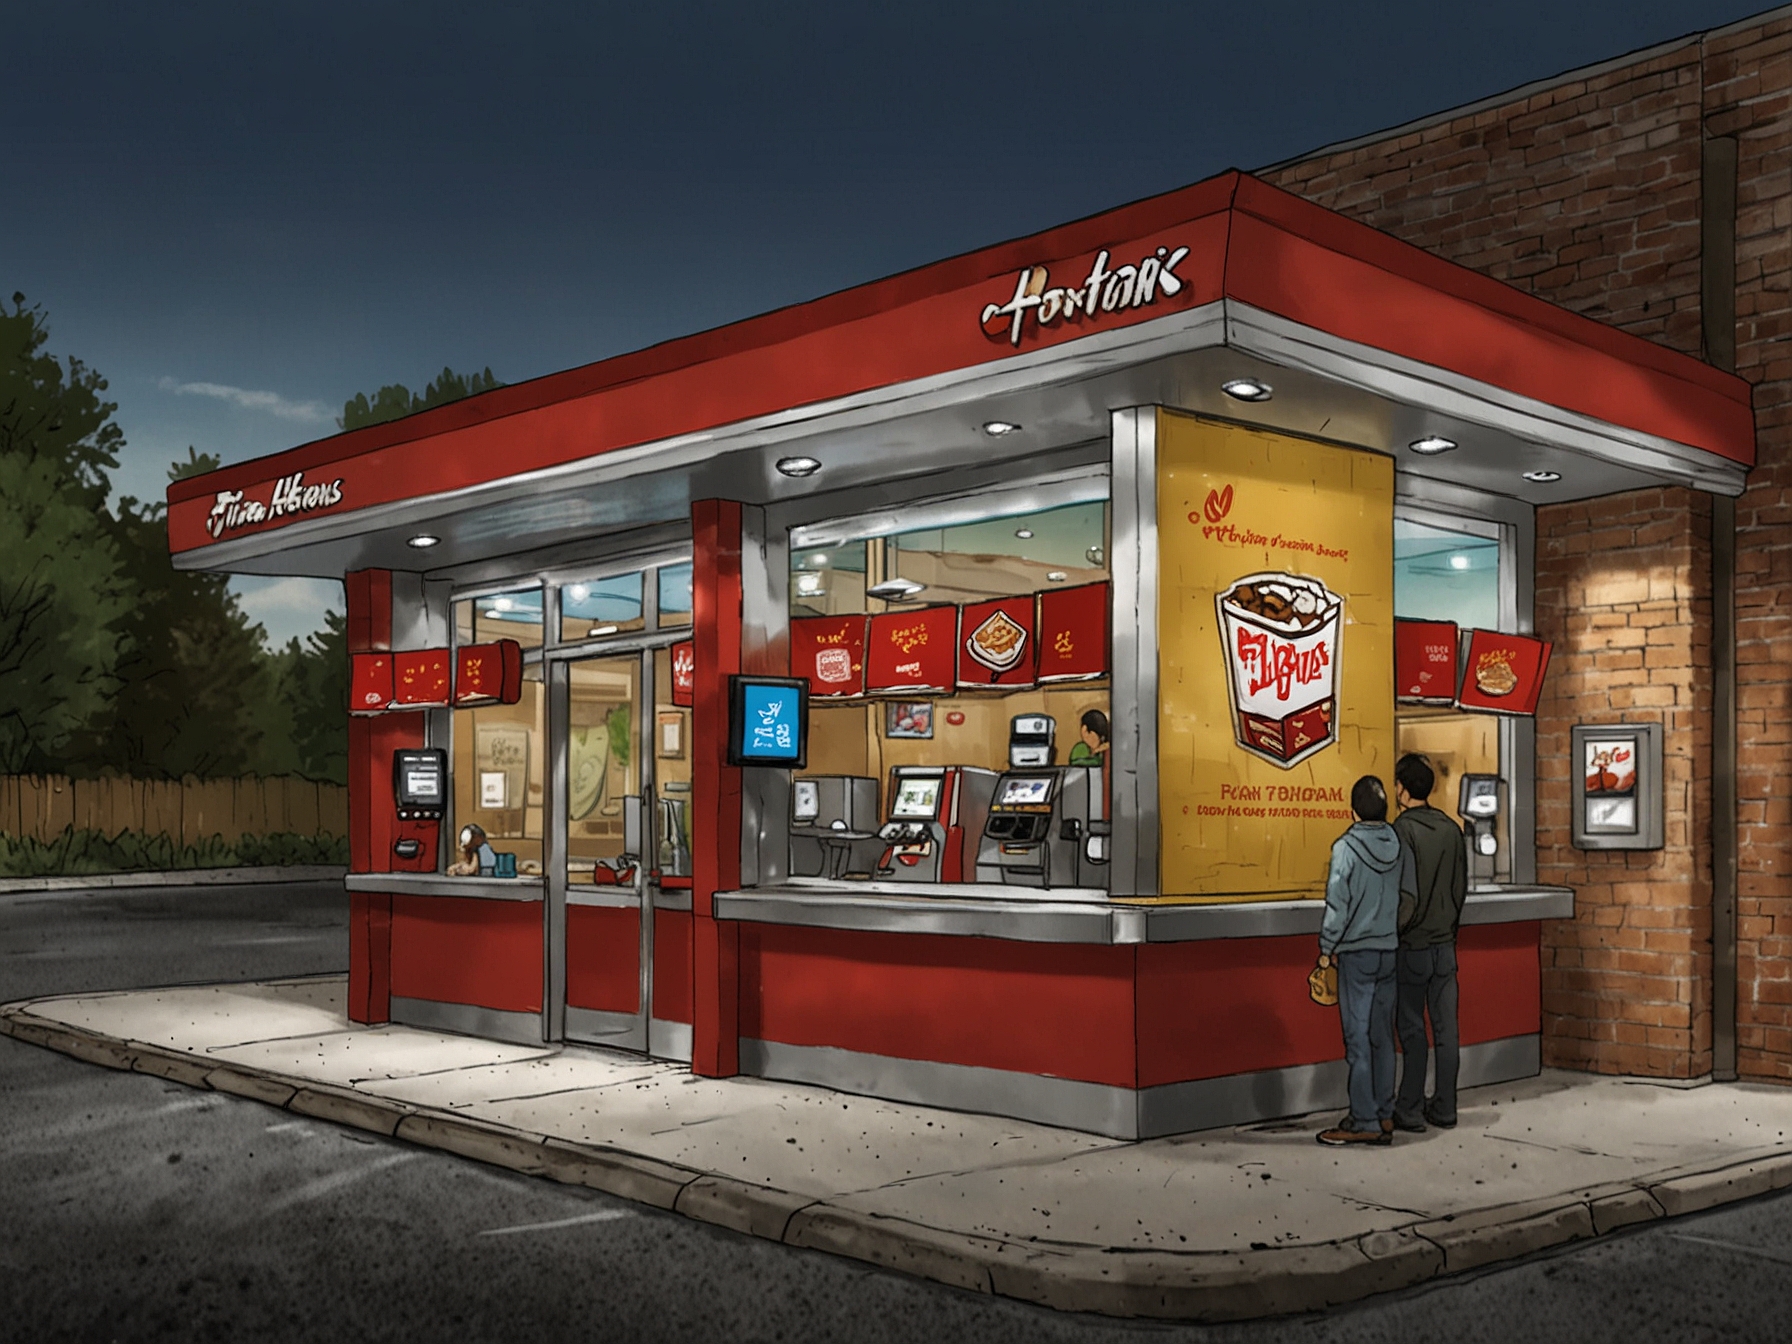 A digital representation showing the collaboration between Tim Hortons and a Chinese tech firm, featuring mobile payment options, loyalty programs, and a seamless digital customer experience.